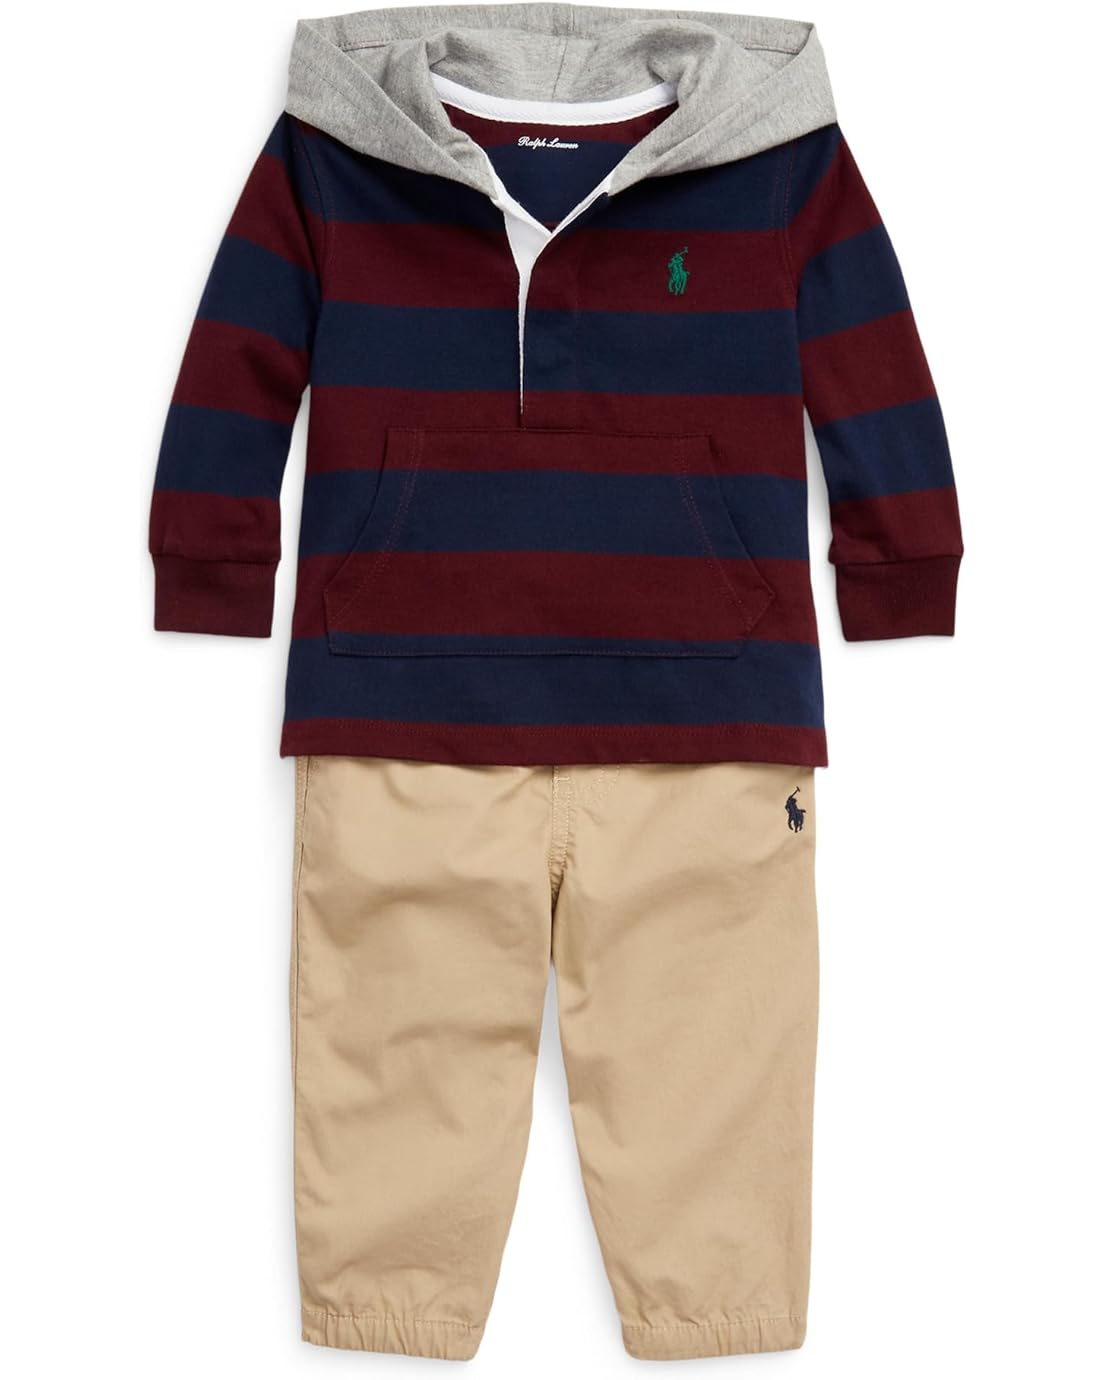 Polo Ralph Lauren Kids Cotton Hooded Rugby Shirt & Pants Set (Infant)